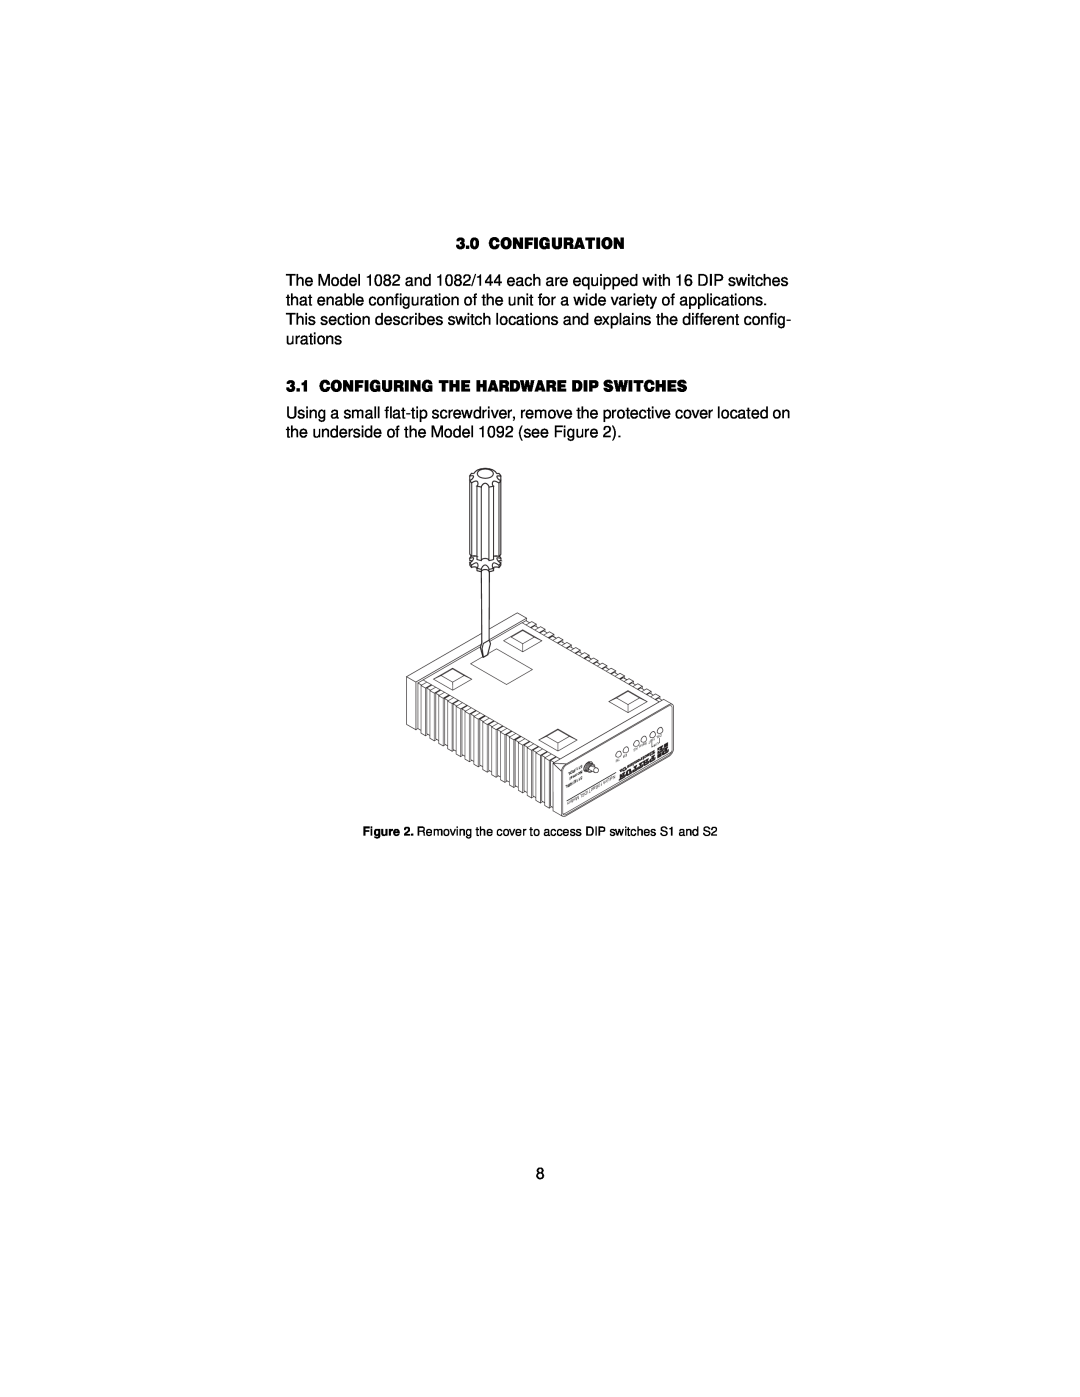 Patton electronic 1082/144 user manual Configuration, Configuring The Hardware Dip Switches 